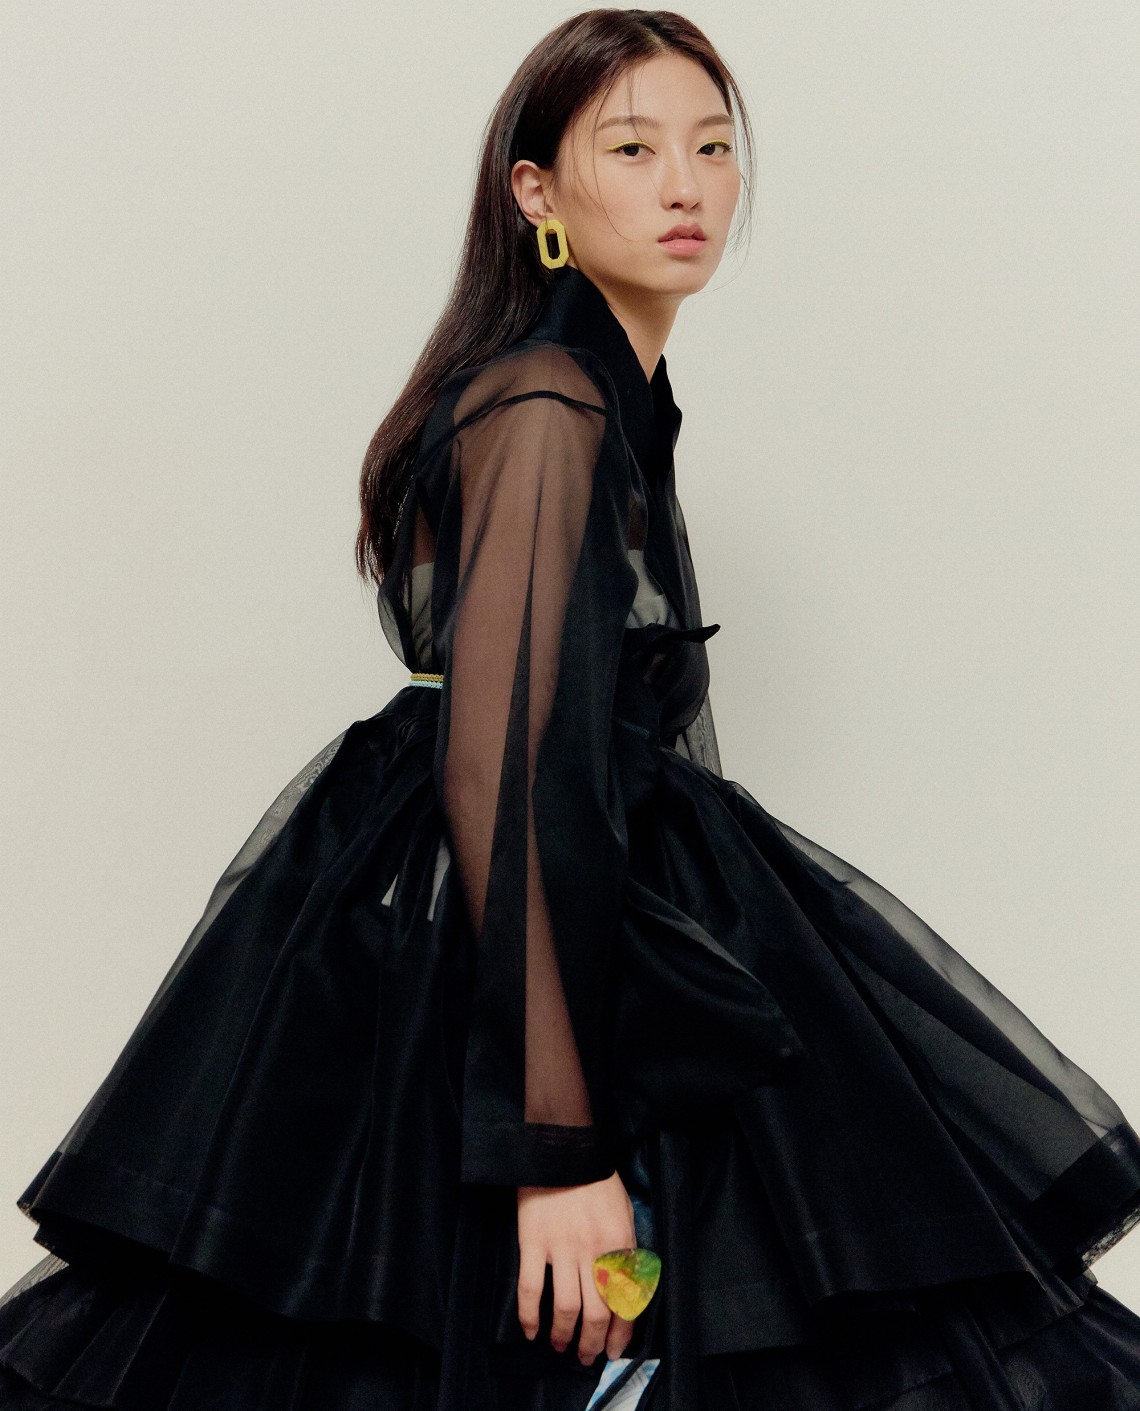 Traditional with a Pop twist: Korean sustainable fashion brand Danha ...